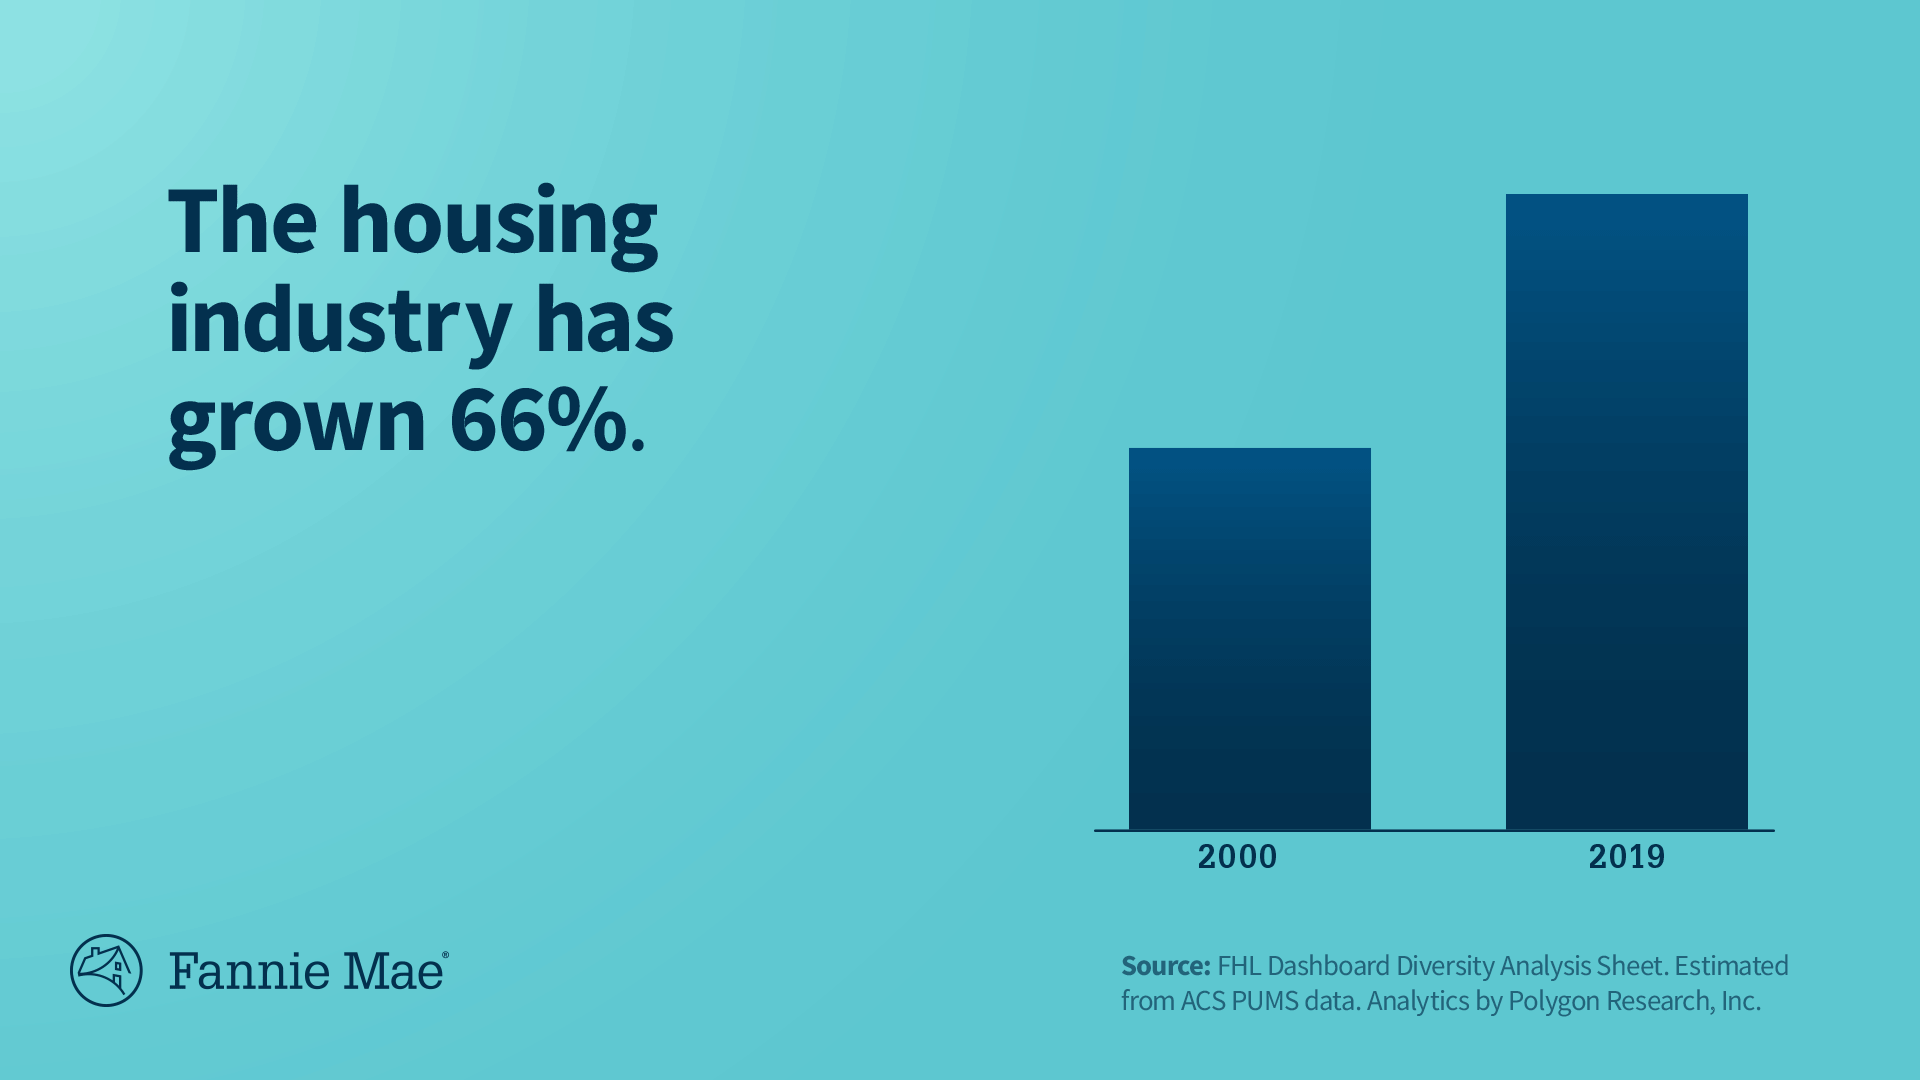 Housing industry has grown 66% since 2000